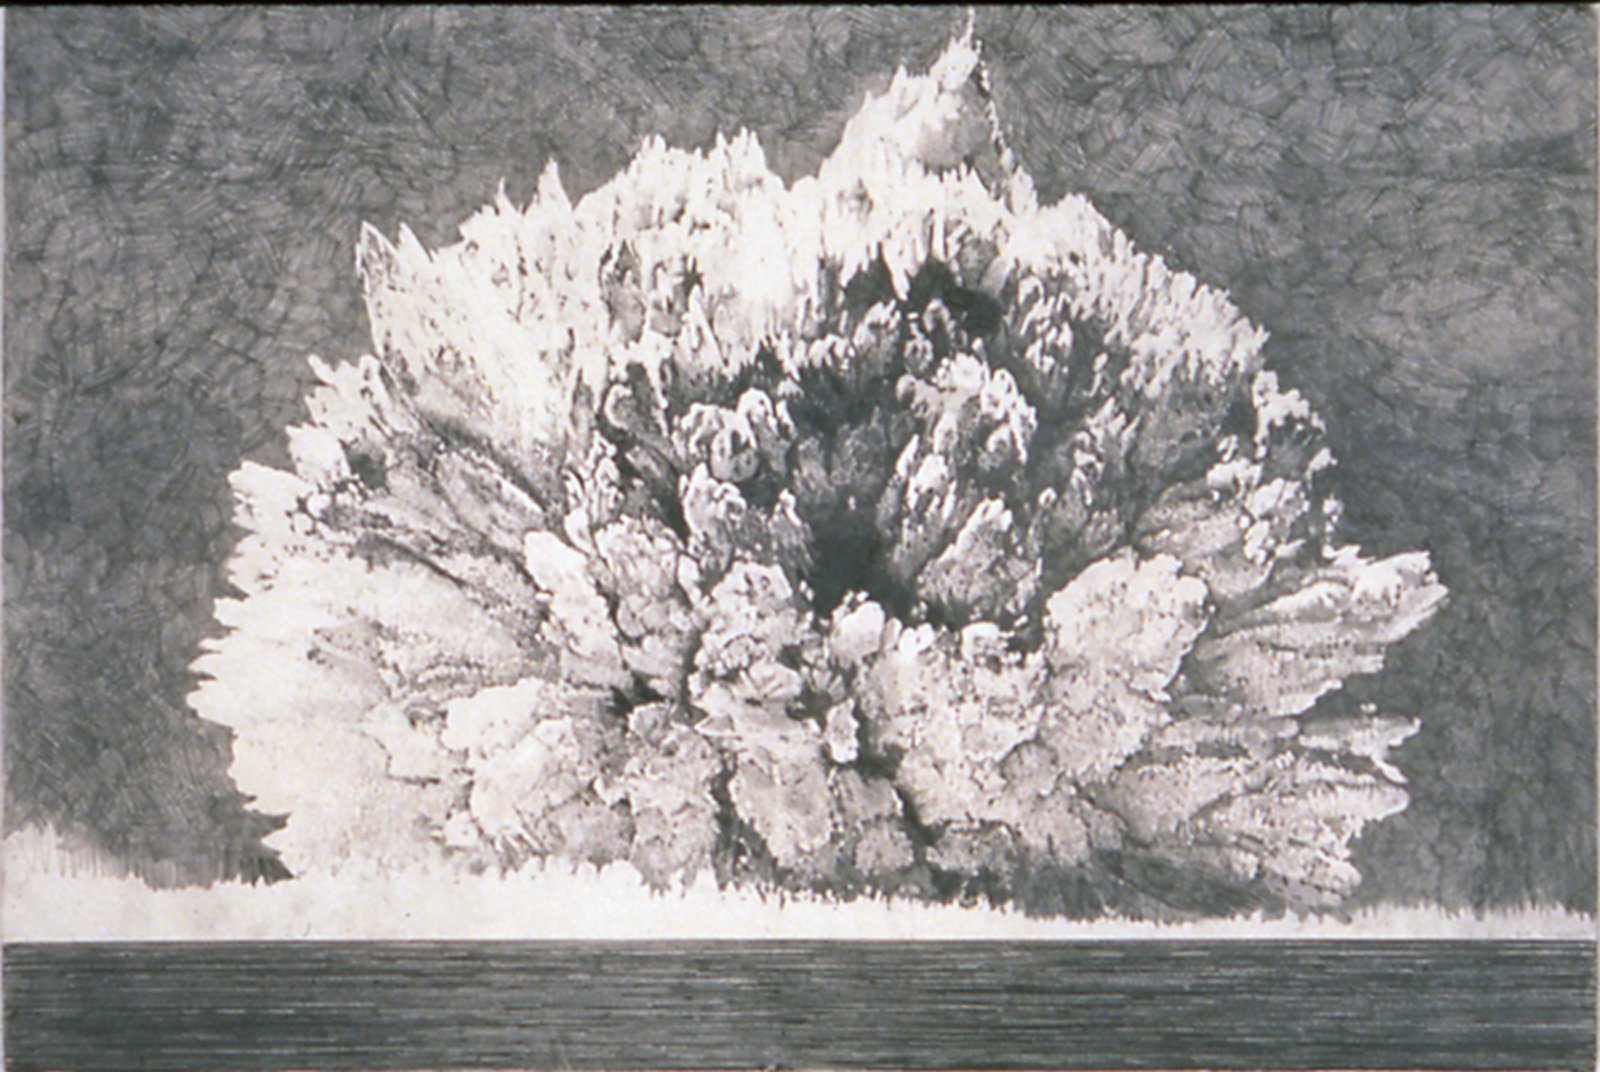 Blast, 1997-1998, Graphite on Paper, 40 x 60 inches, Tang Museum of Art Skidmore College